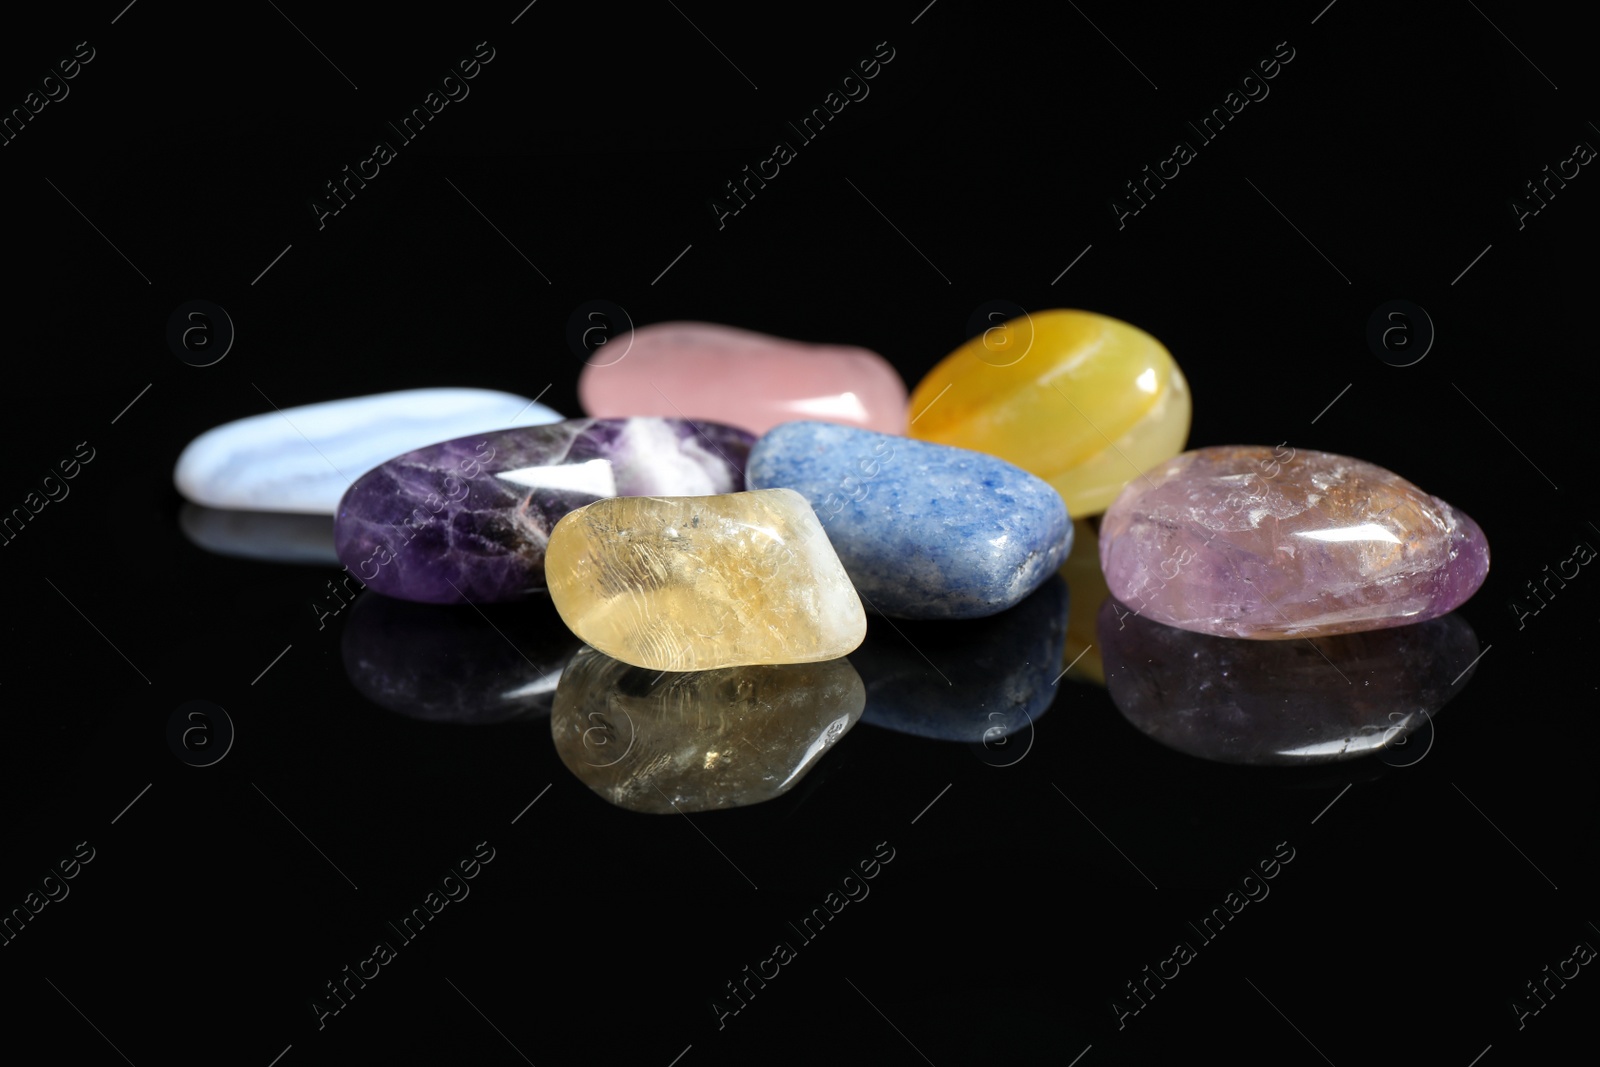 Photo of Pile of different beautiful gemstones on black background